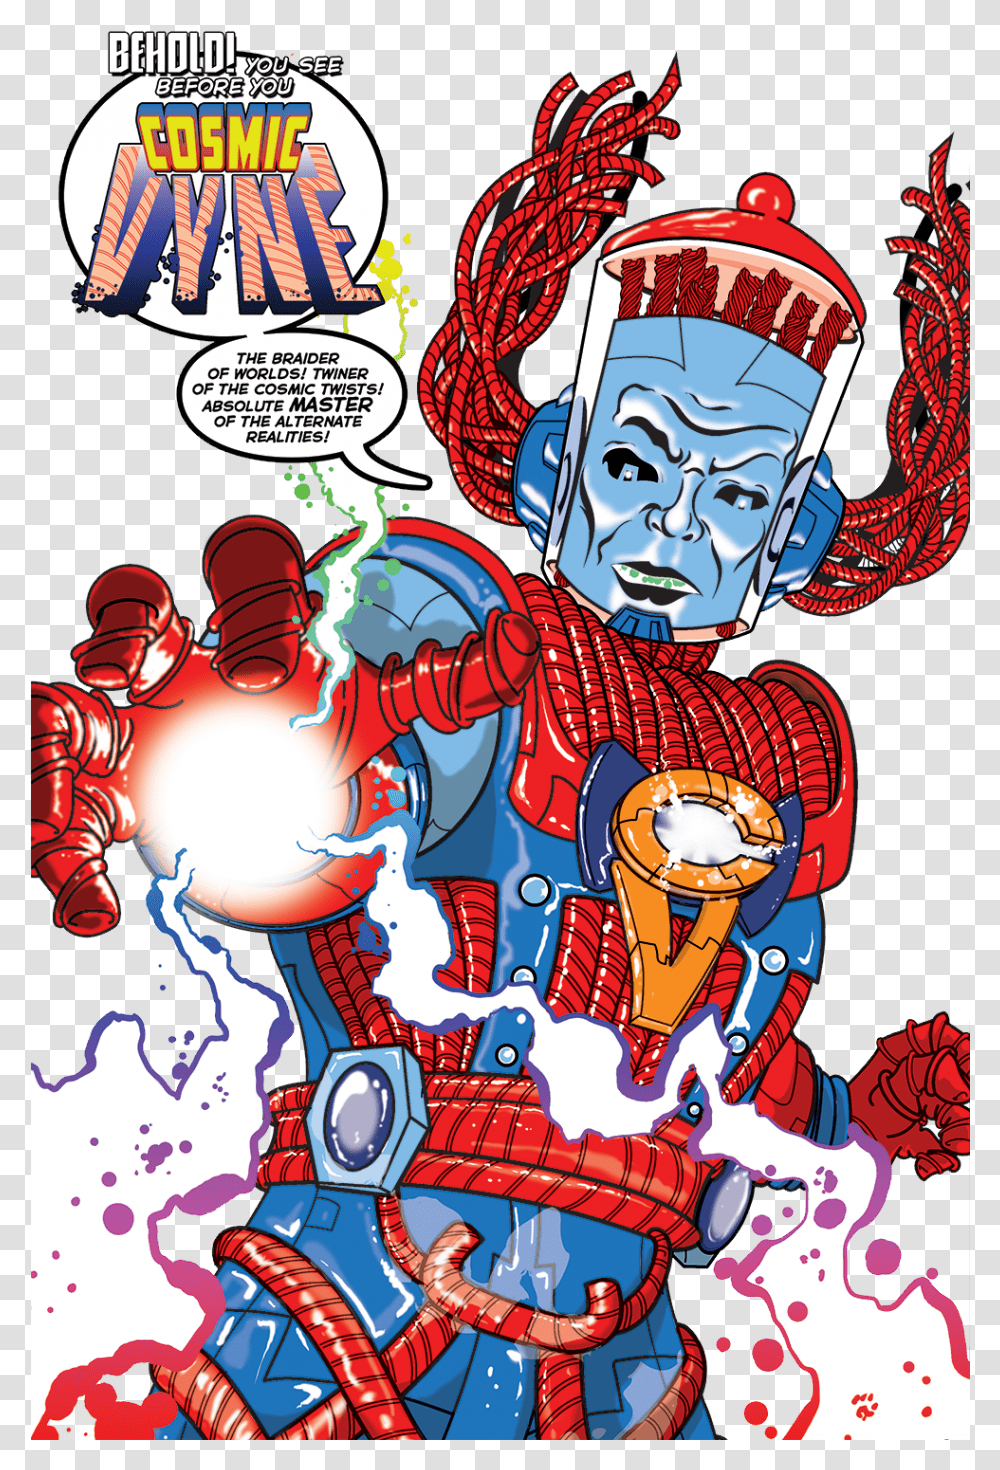 Oh Yeahand Then There's Cosmic Vynewho Seems To Have Cartoon, Comics, Book, Poster, Advertisement Transparent Png